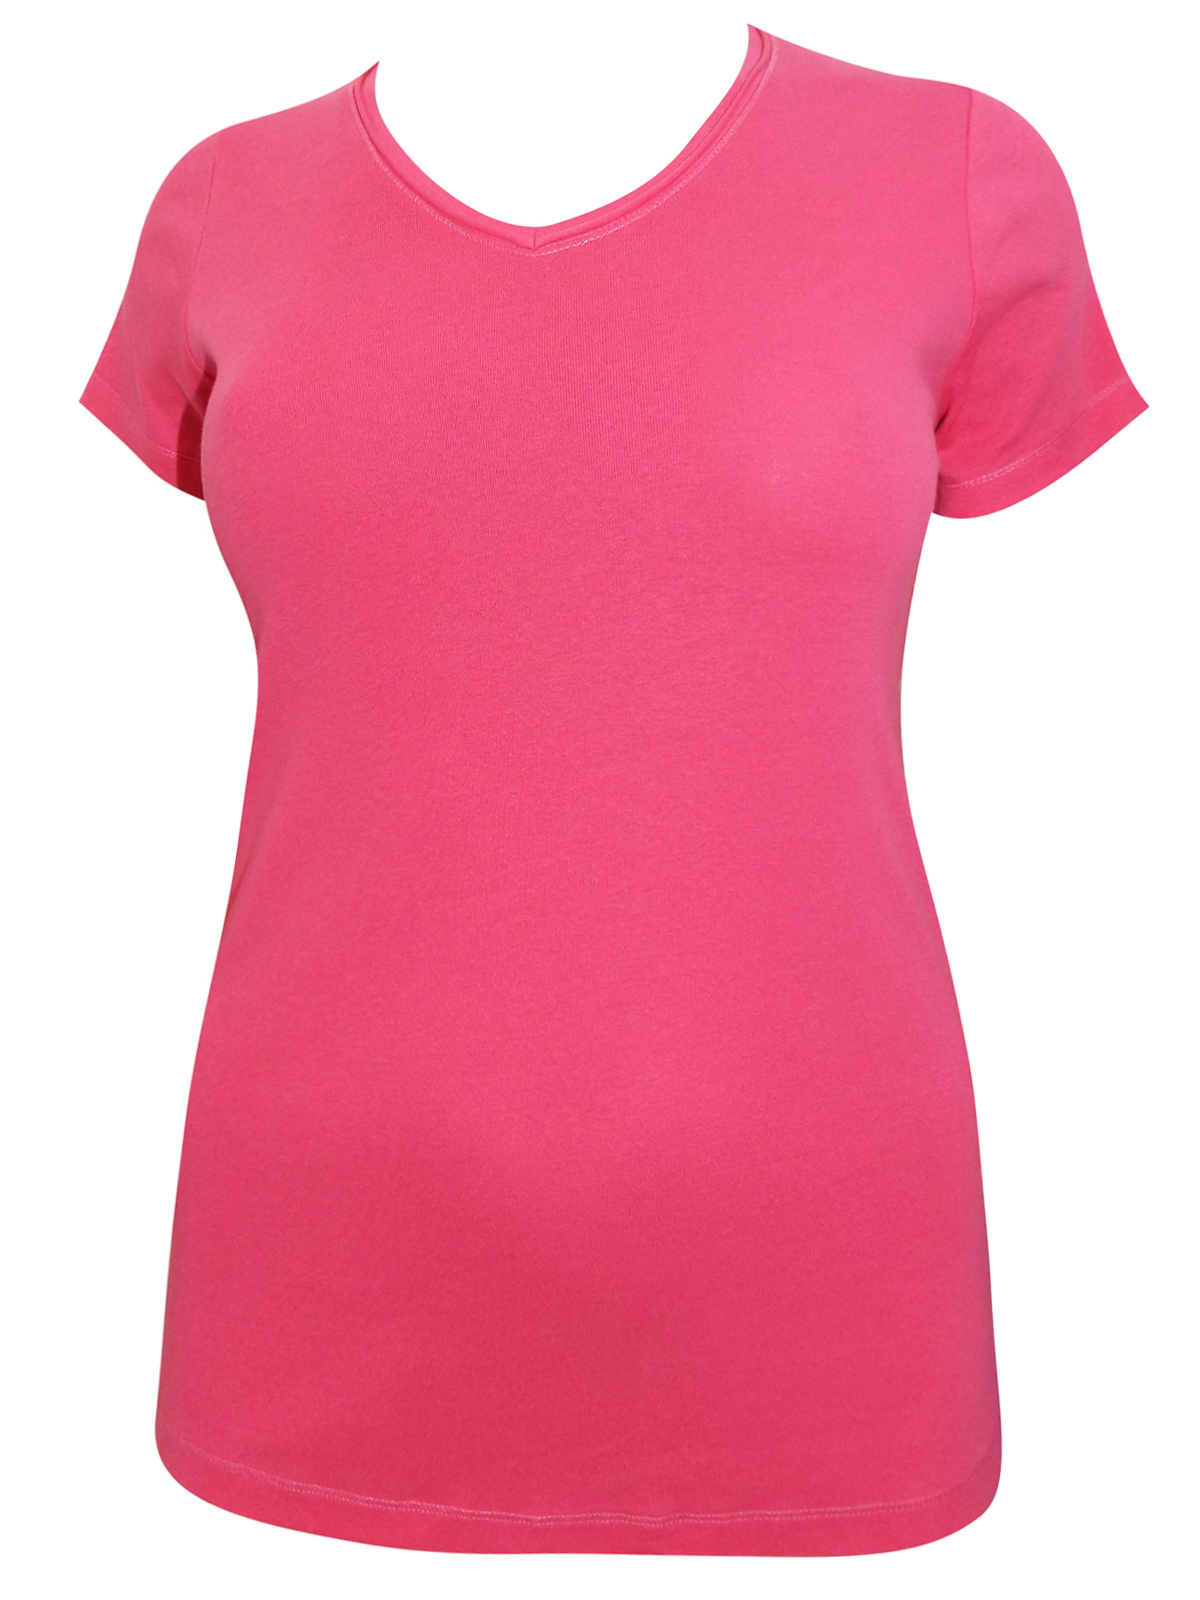 Y0urs Yours Pink Pure Cotton V Neck Short Sleeve T Shirt Plus